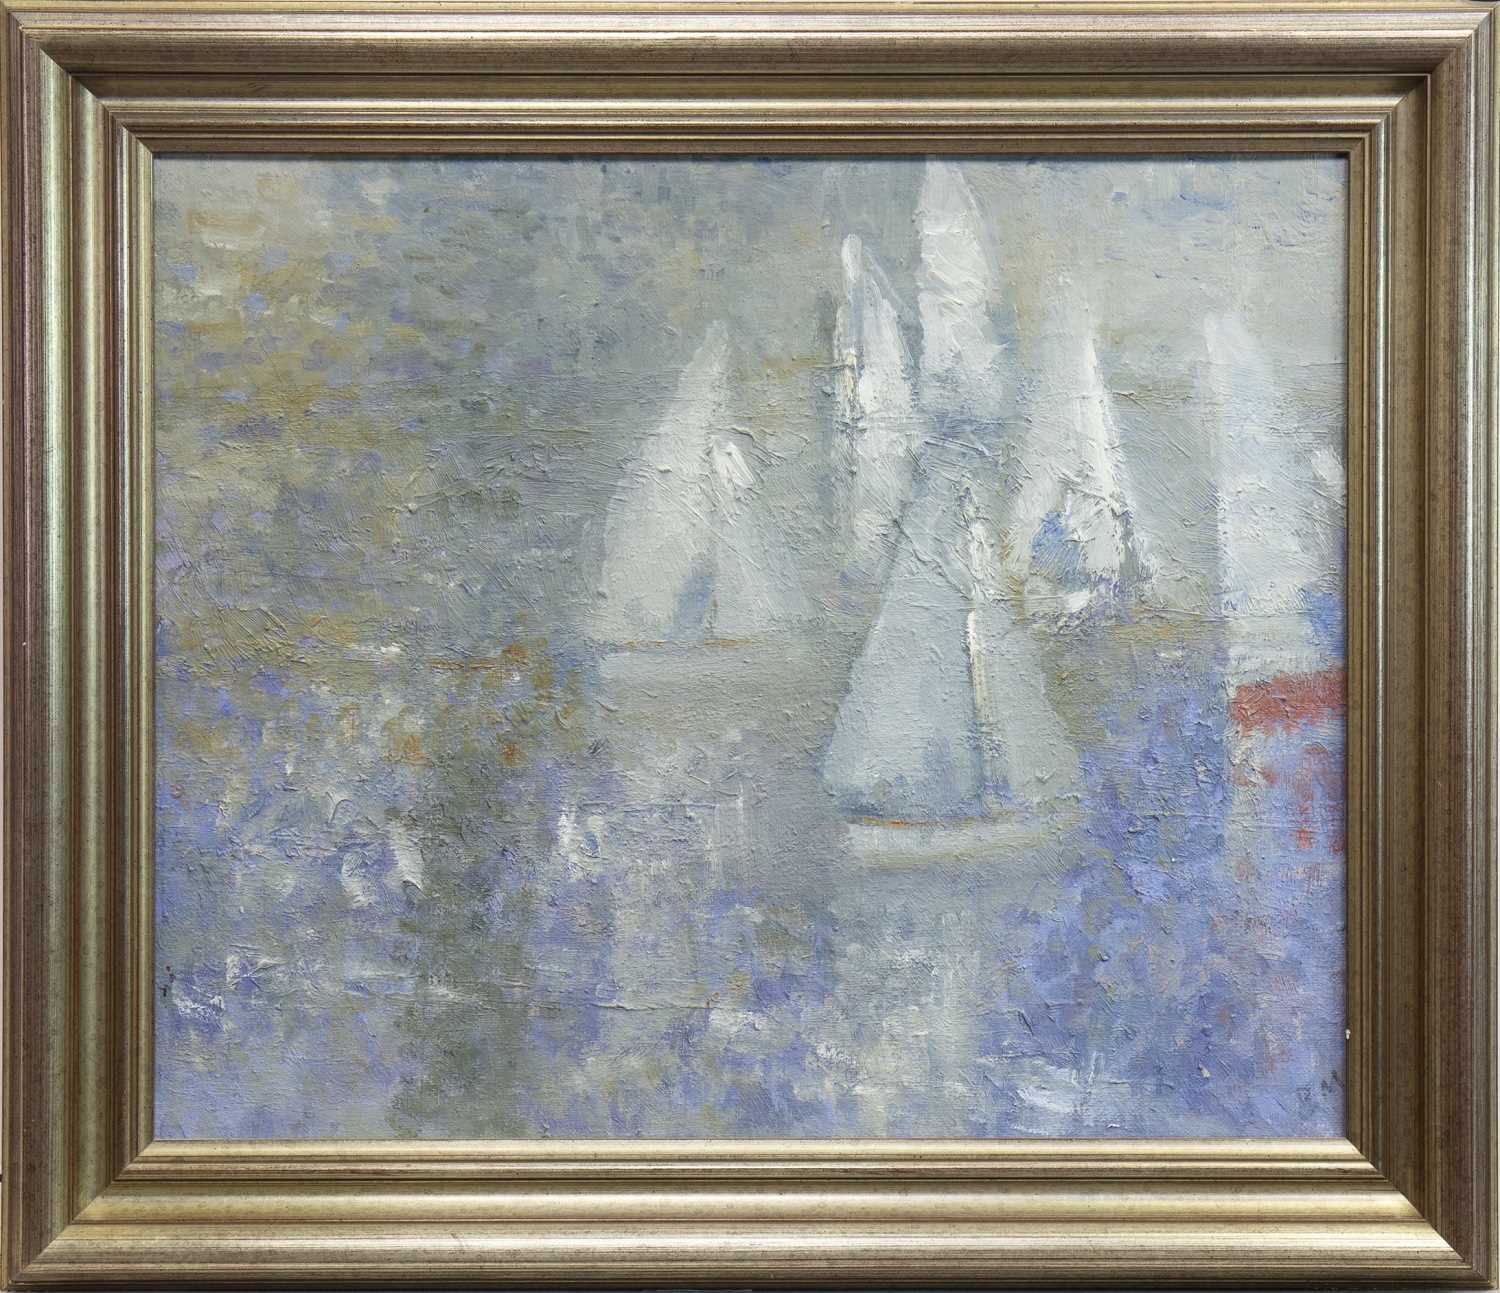 Lot 548 - SAILS AND REFLECTION, AN OIL BY BERNARD MYERS